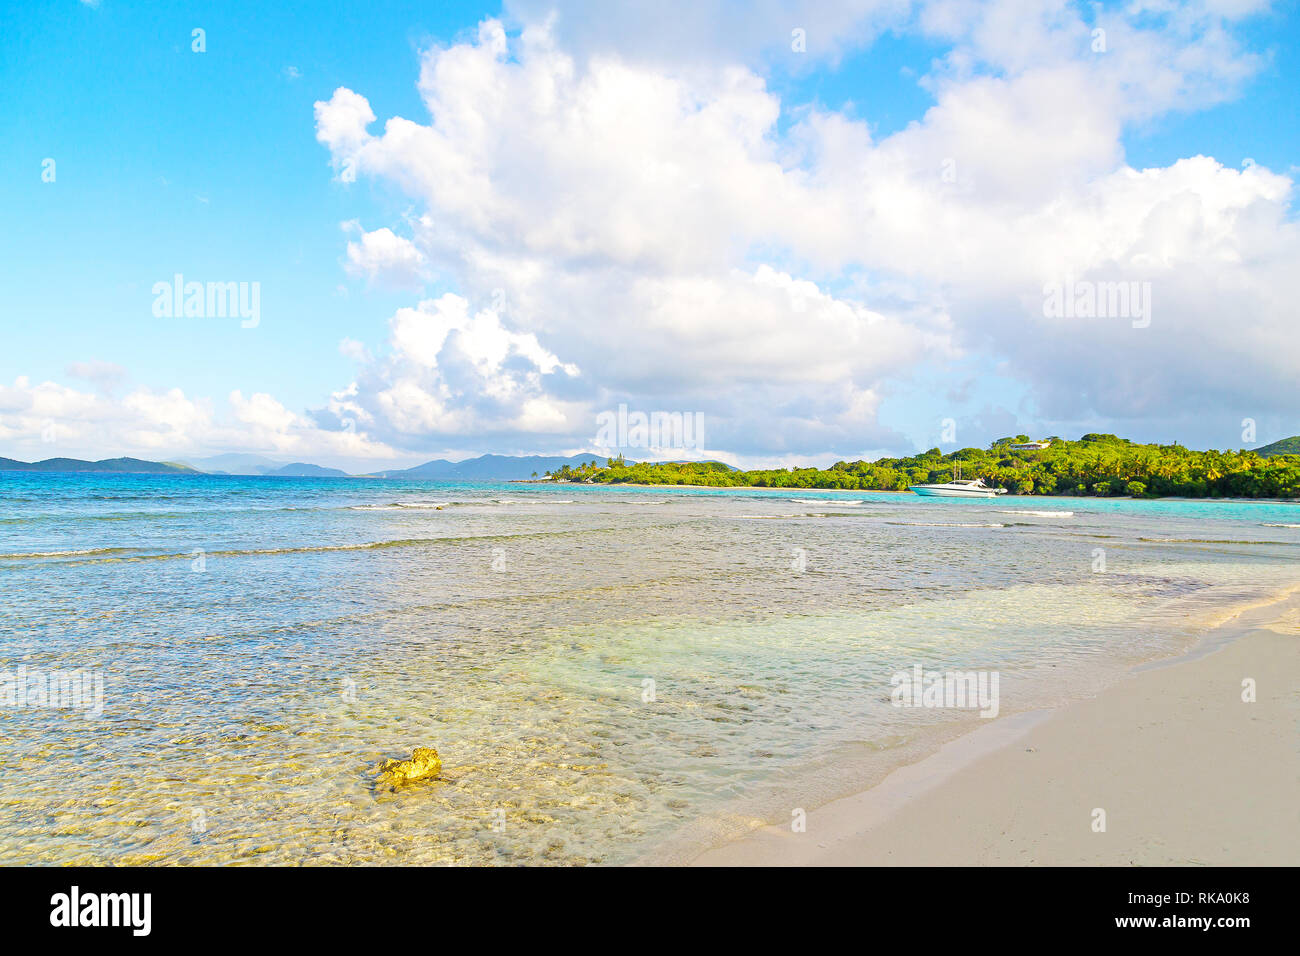 Low tide at sunset on Lindquist Beach, US Virgin Islands. Beautiful beach on St Thomas Island and other islands on horizon. Stock Photo